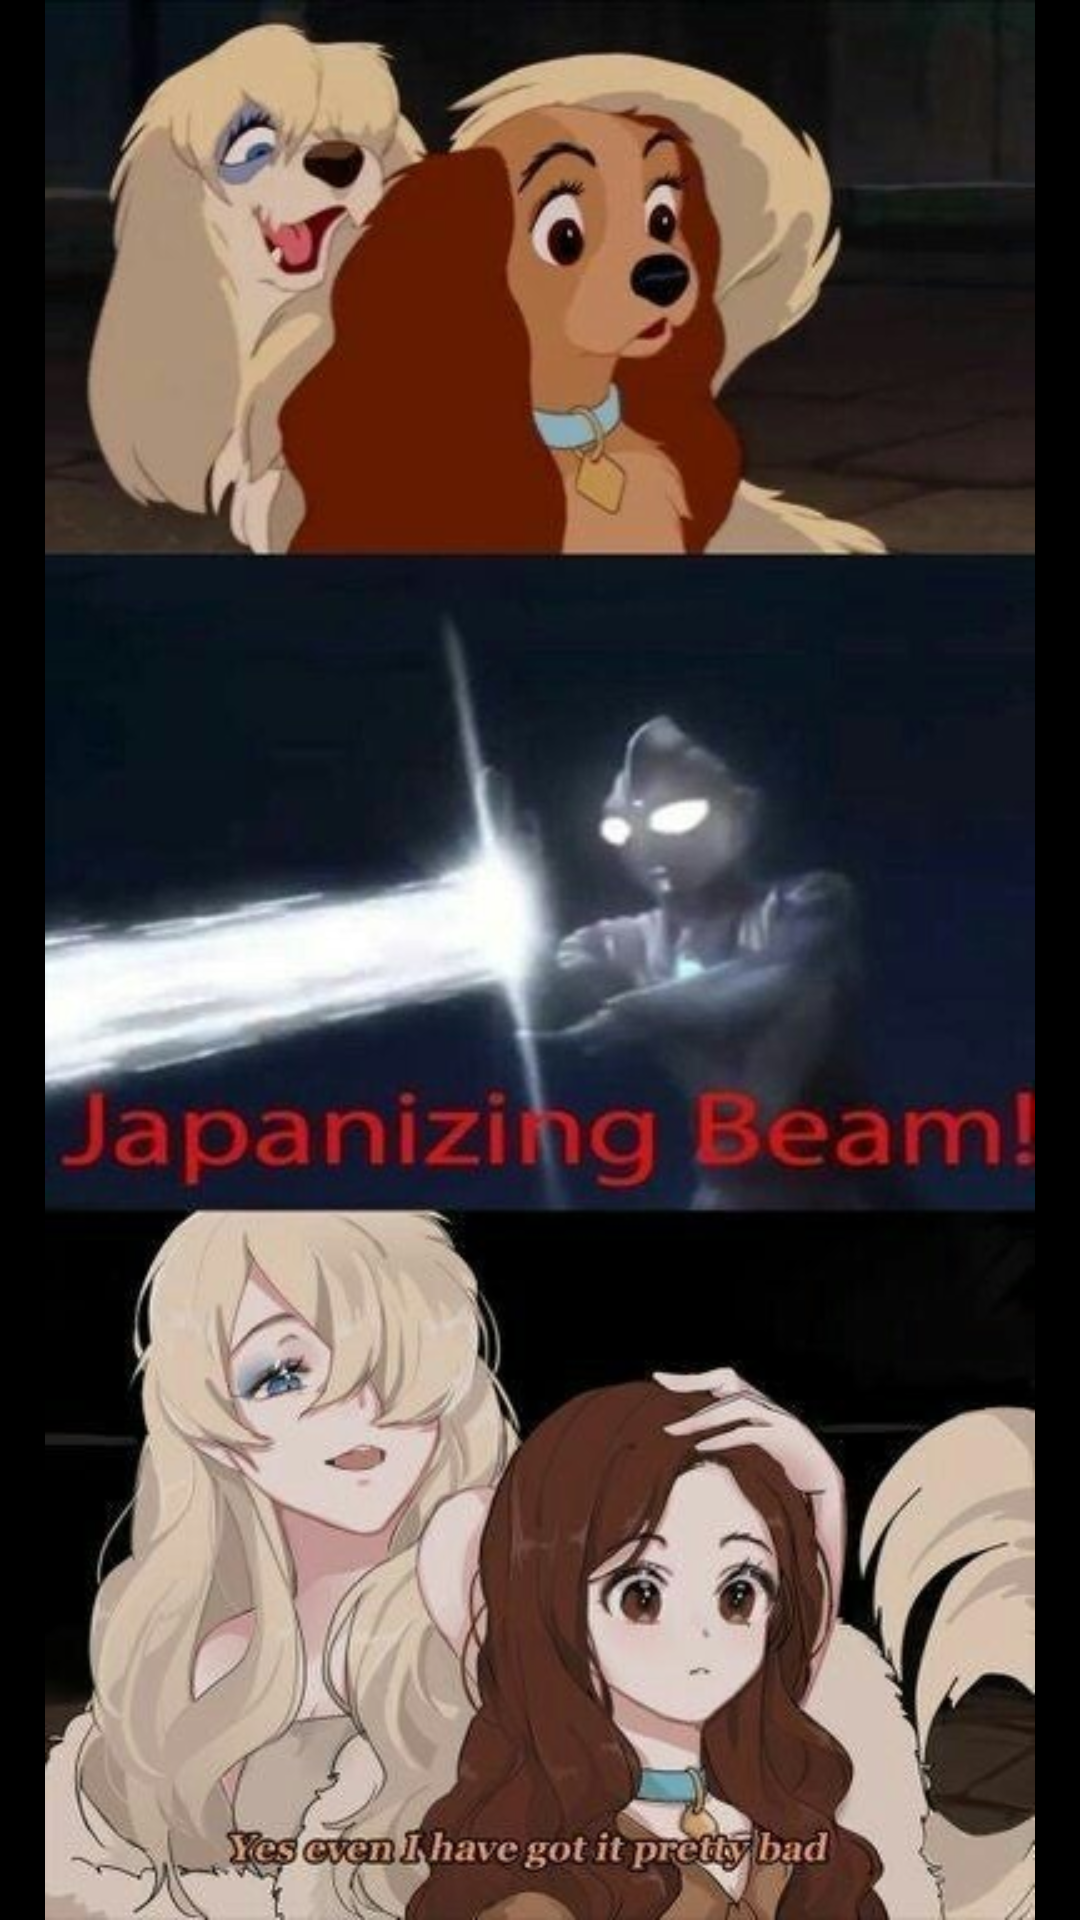 lady and the tramp redraw - Japanizing Beam! Med en have got it pretty had